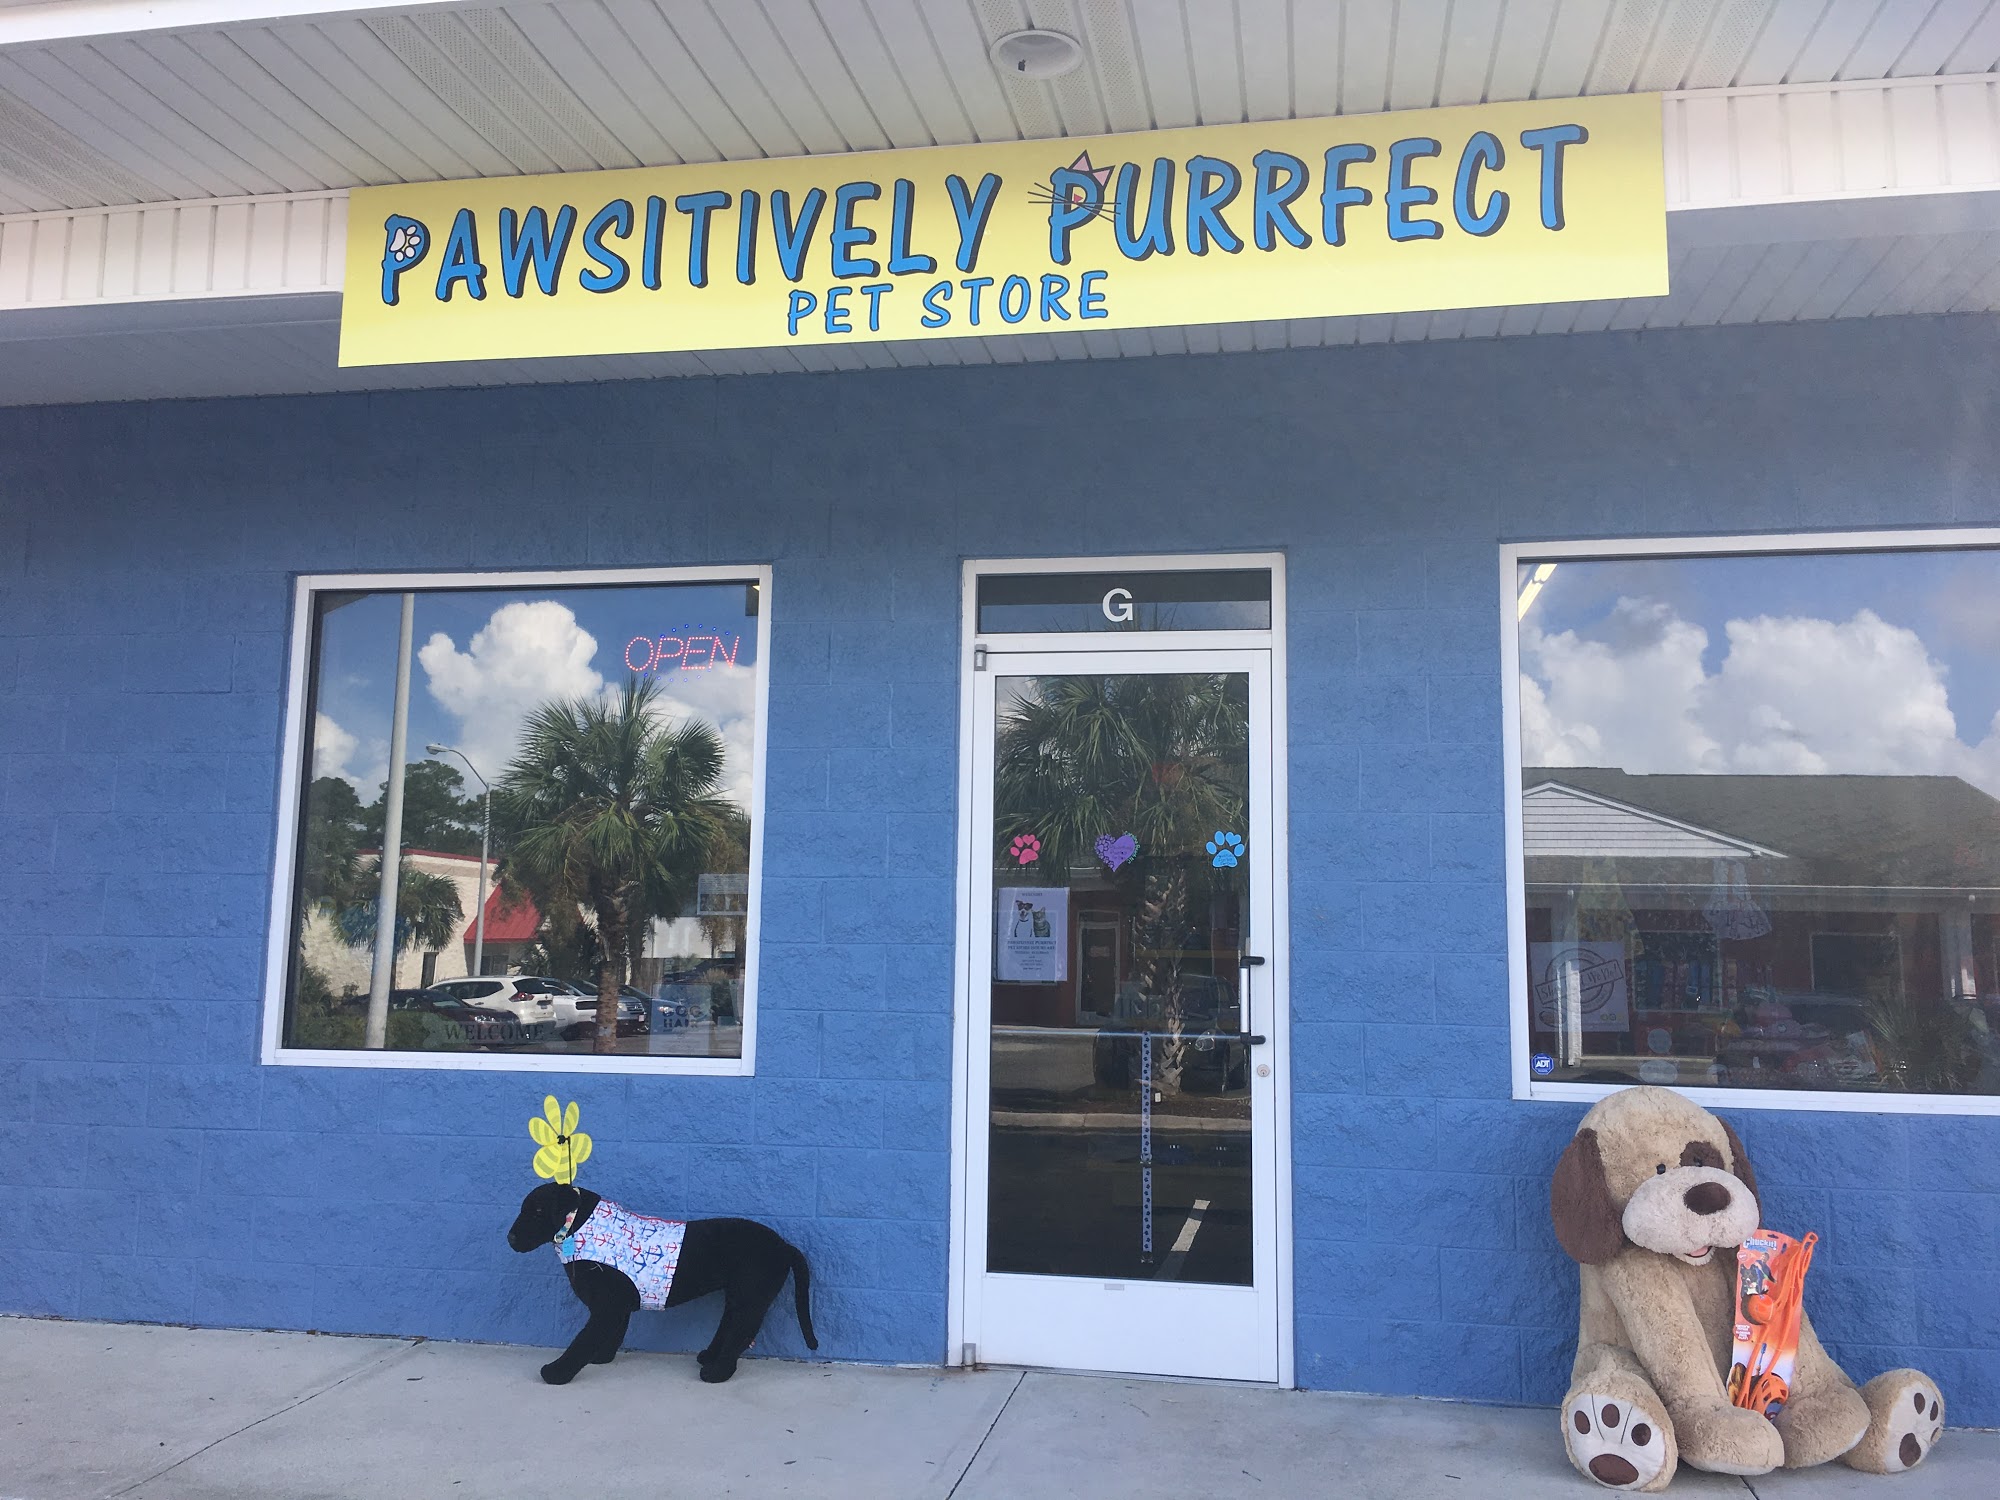 Pawsitively Purrfect Pet Store